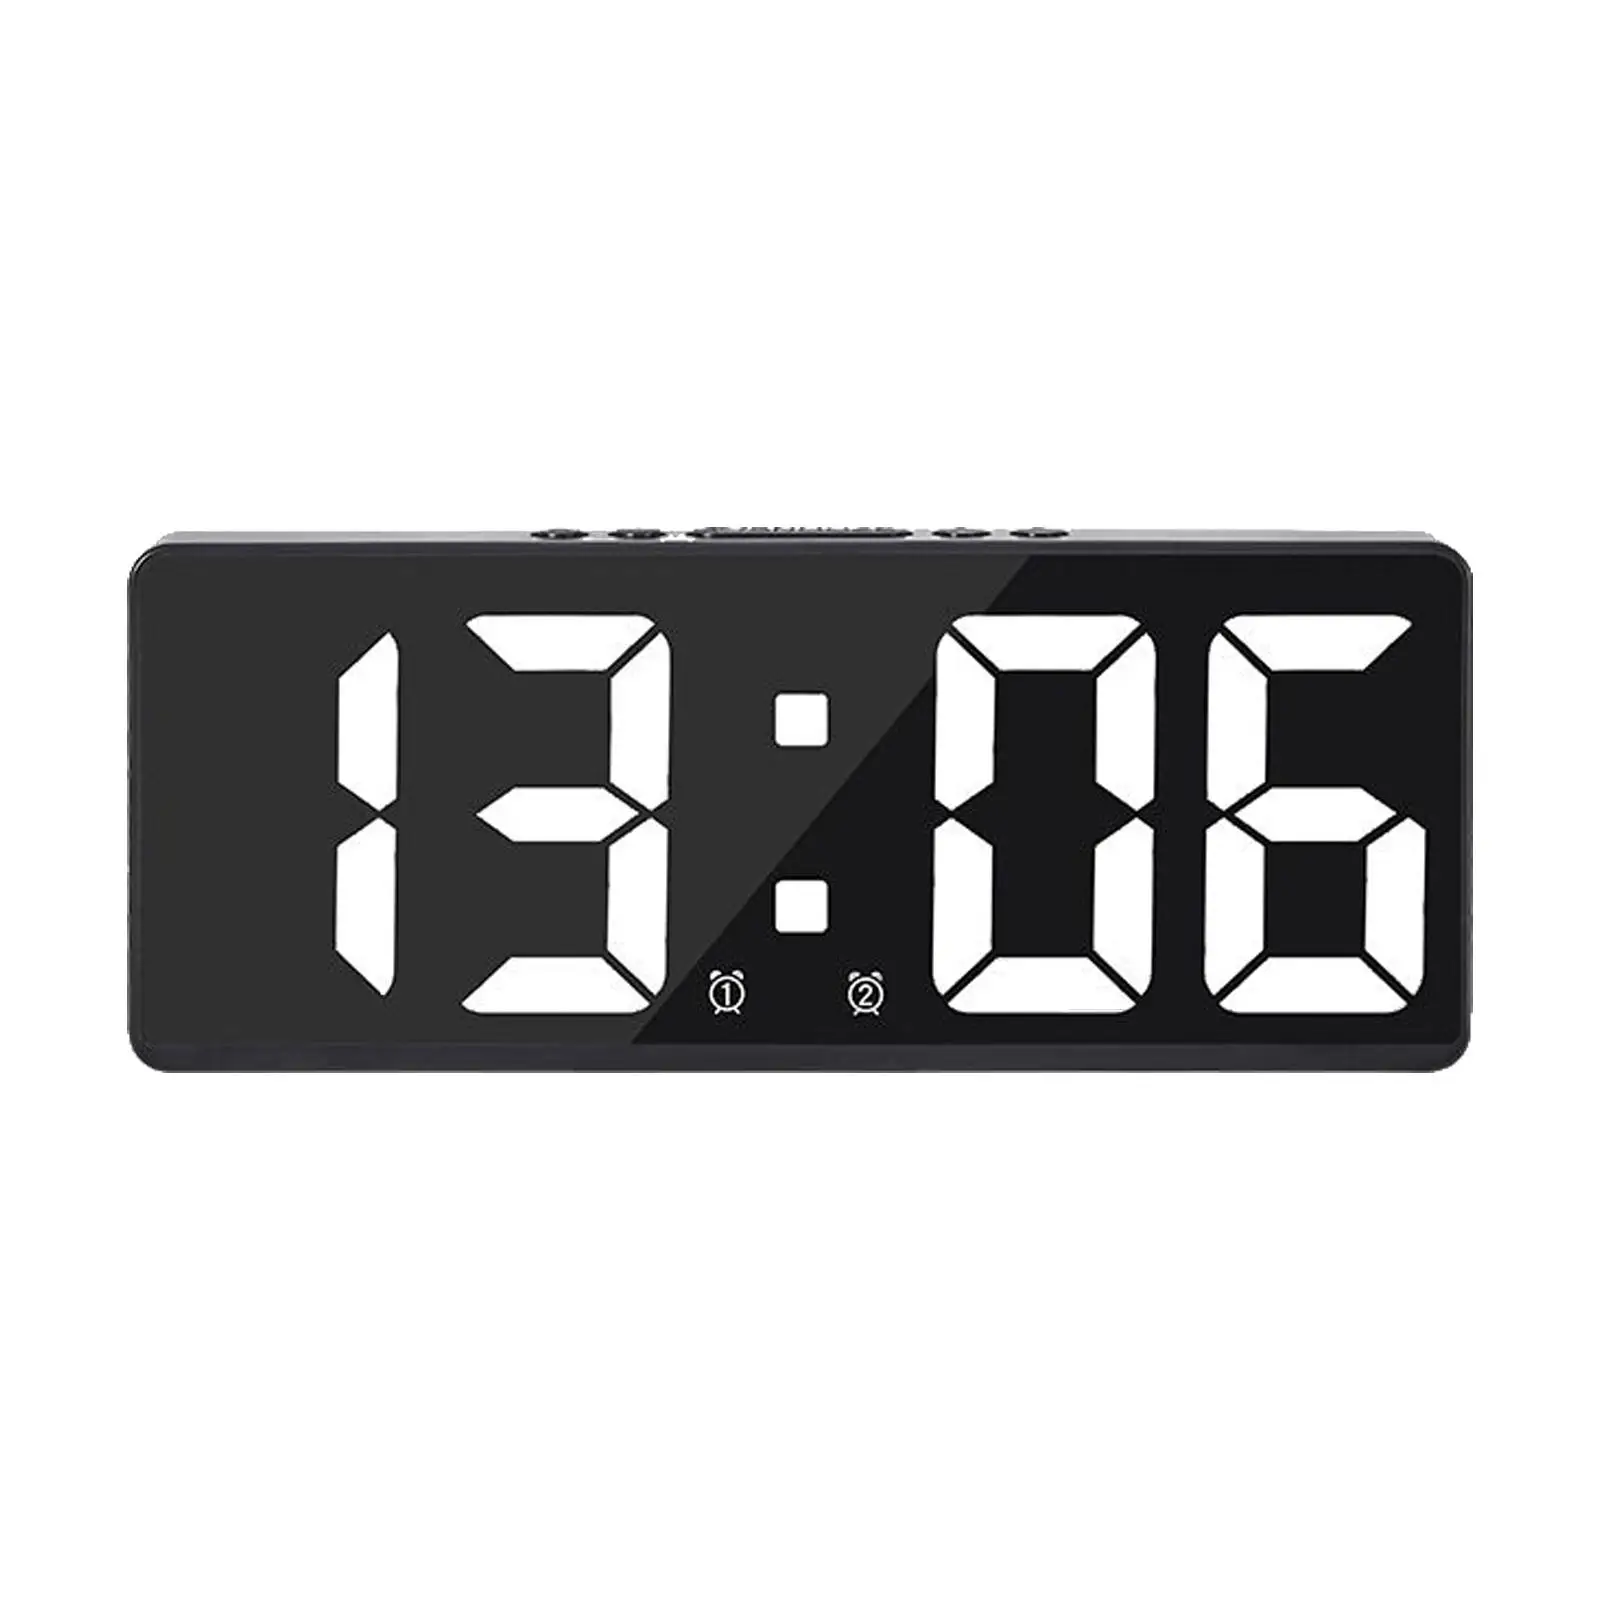 Large Number Alarm Clock Electronic Table for Office Bedroom, Holiday Gifts